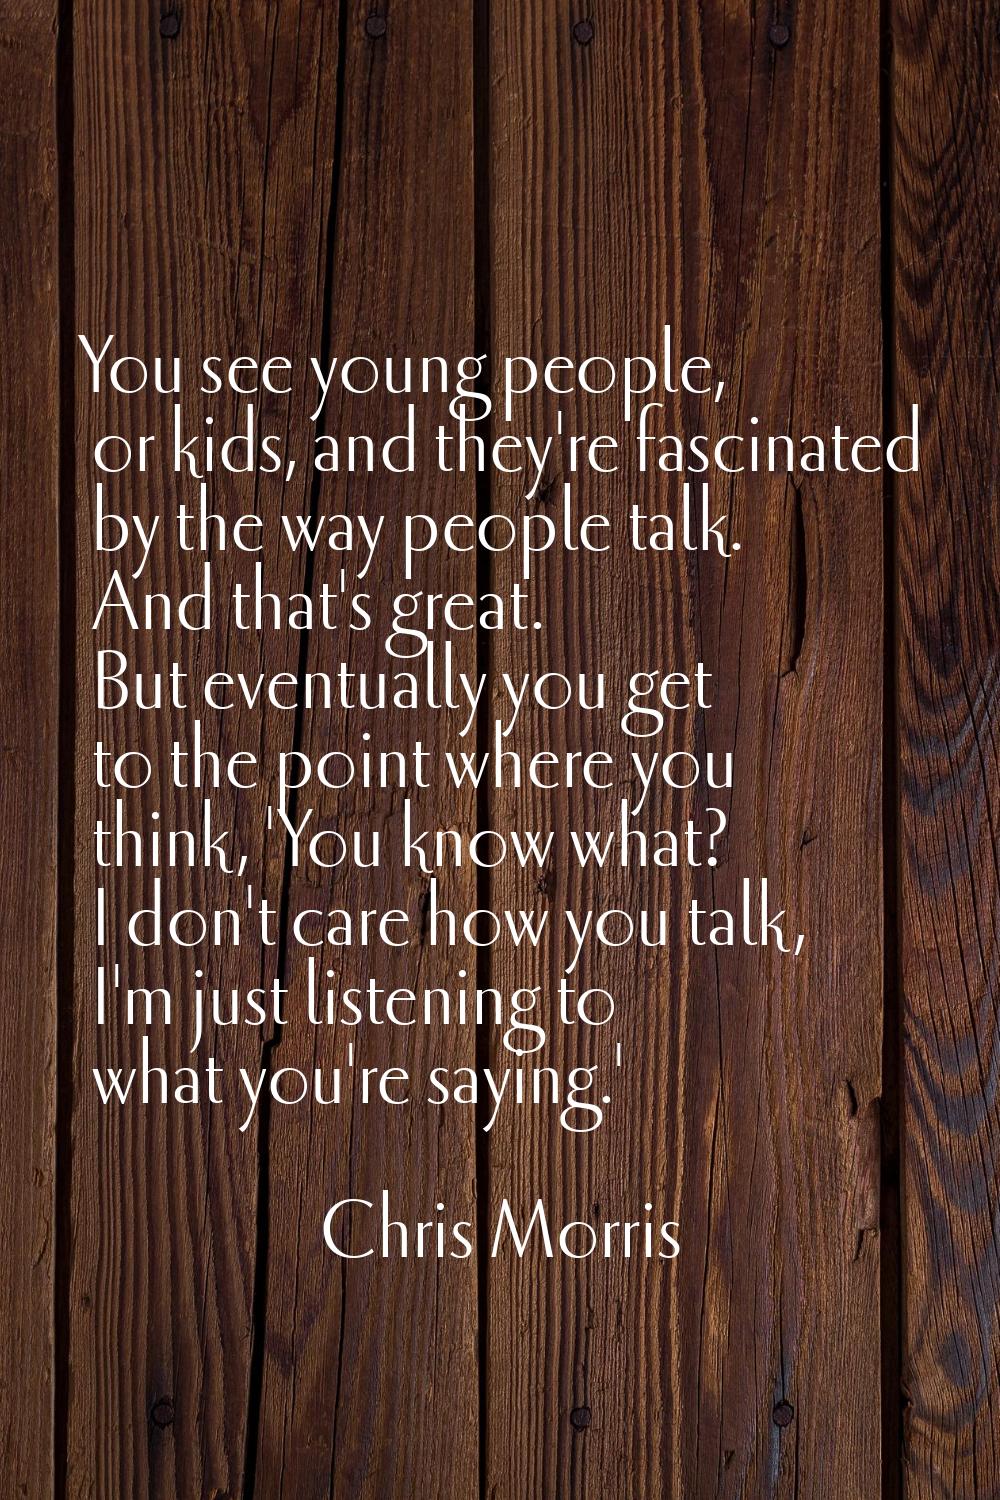 You see young people, or kids, and they're fascinated by the way people talk. And that's great. But